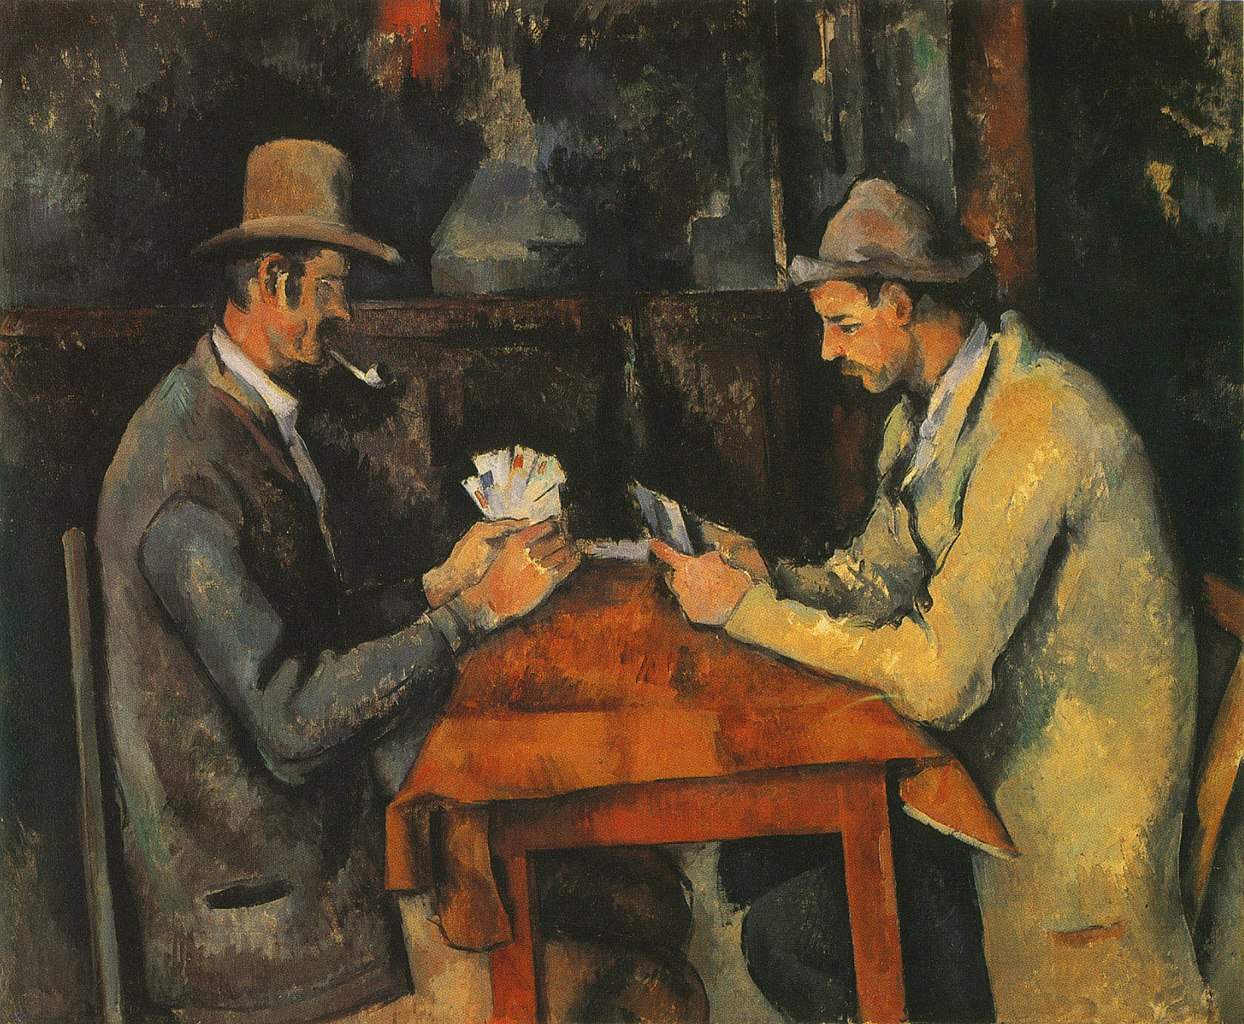 Paul Cézanne. Life and works of the painter who invented 20th century art.